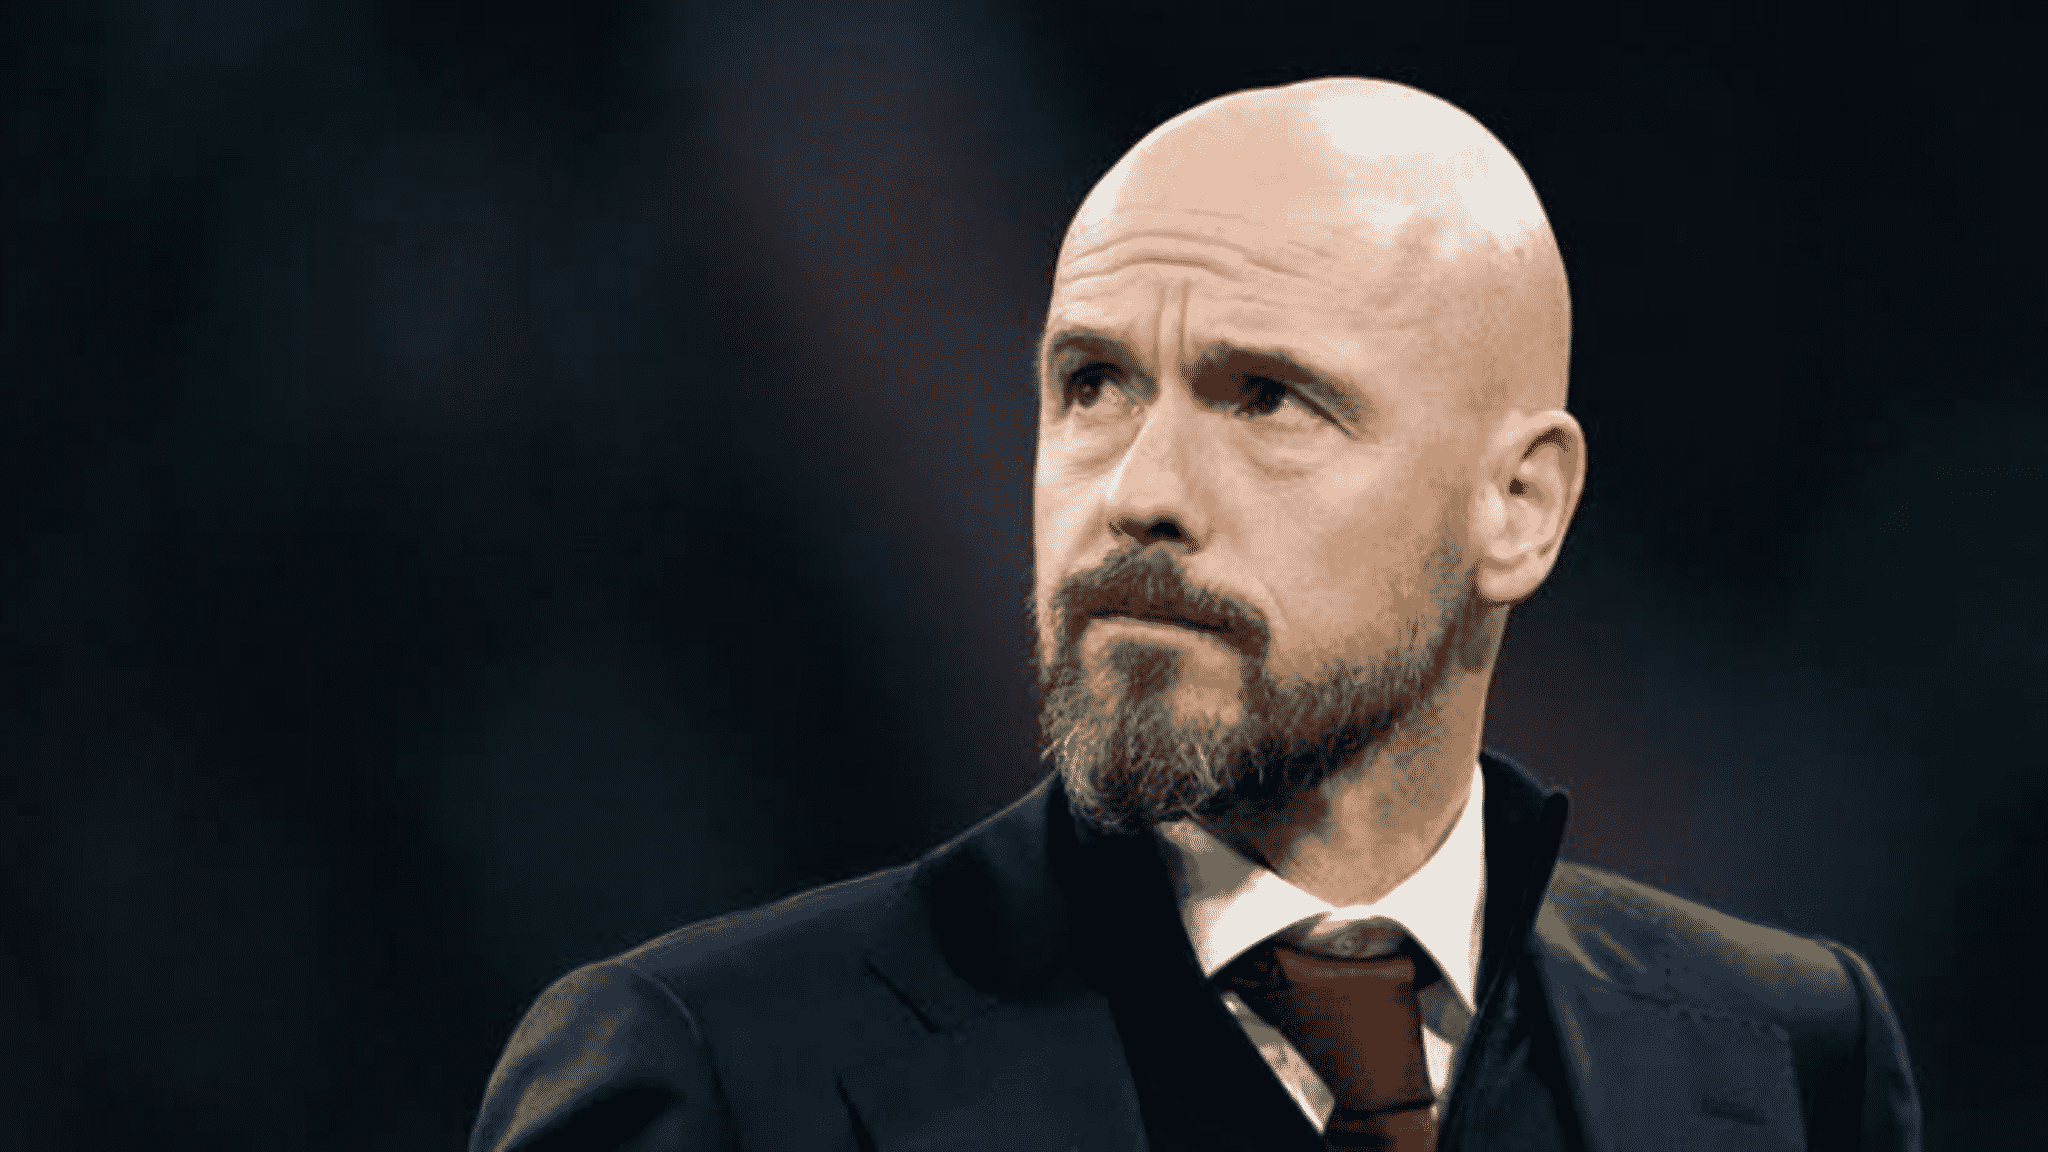 Cristiano Ronaldo asks for fans and club to give Erik ten Hag time to work, My Football Facts